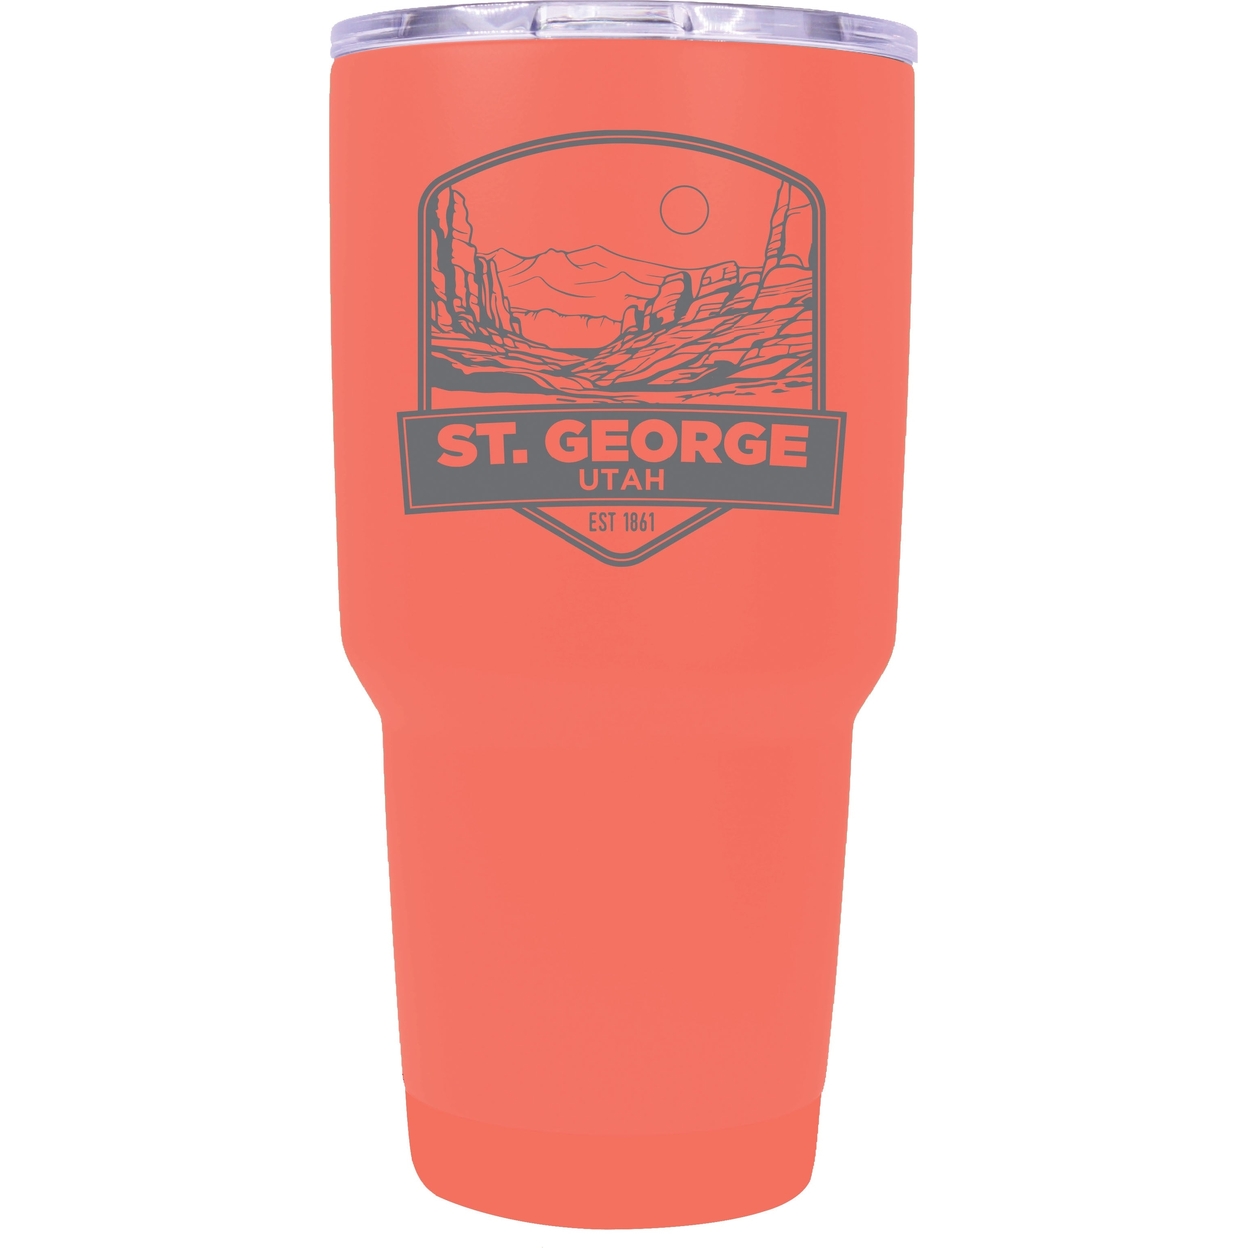 St. George Utah Souvenir 24 Oz Engraved Insulated Stainless Steel Tumbler - Coral,,2-Pack